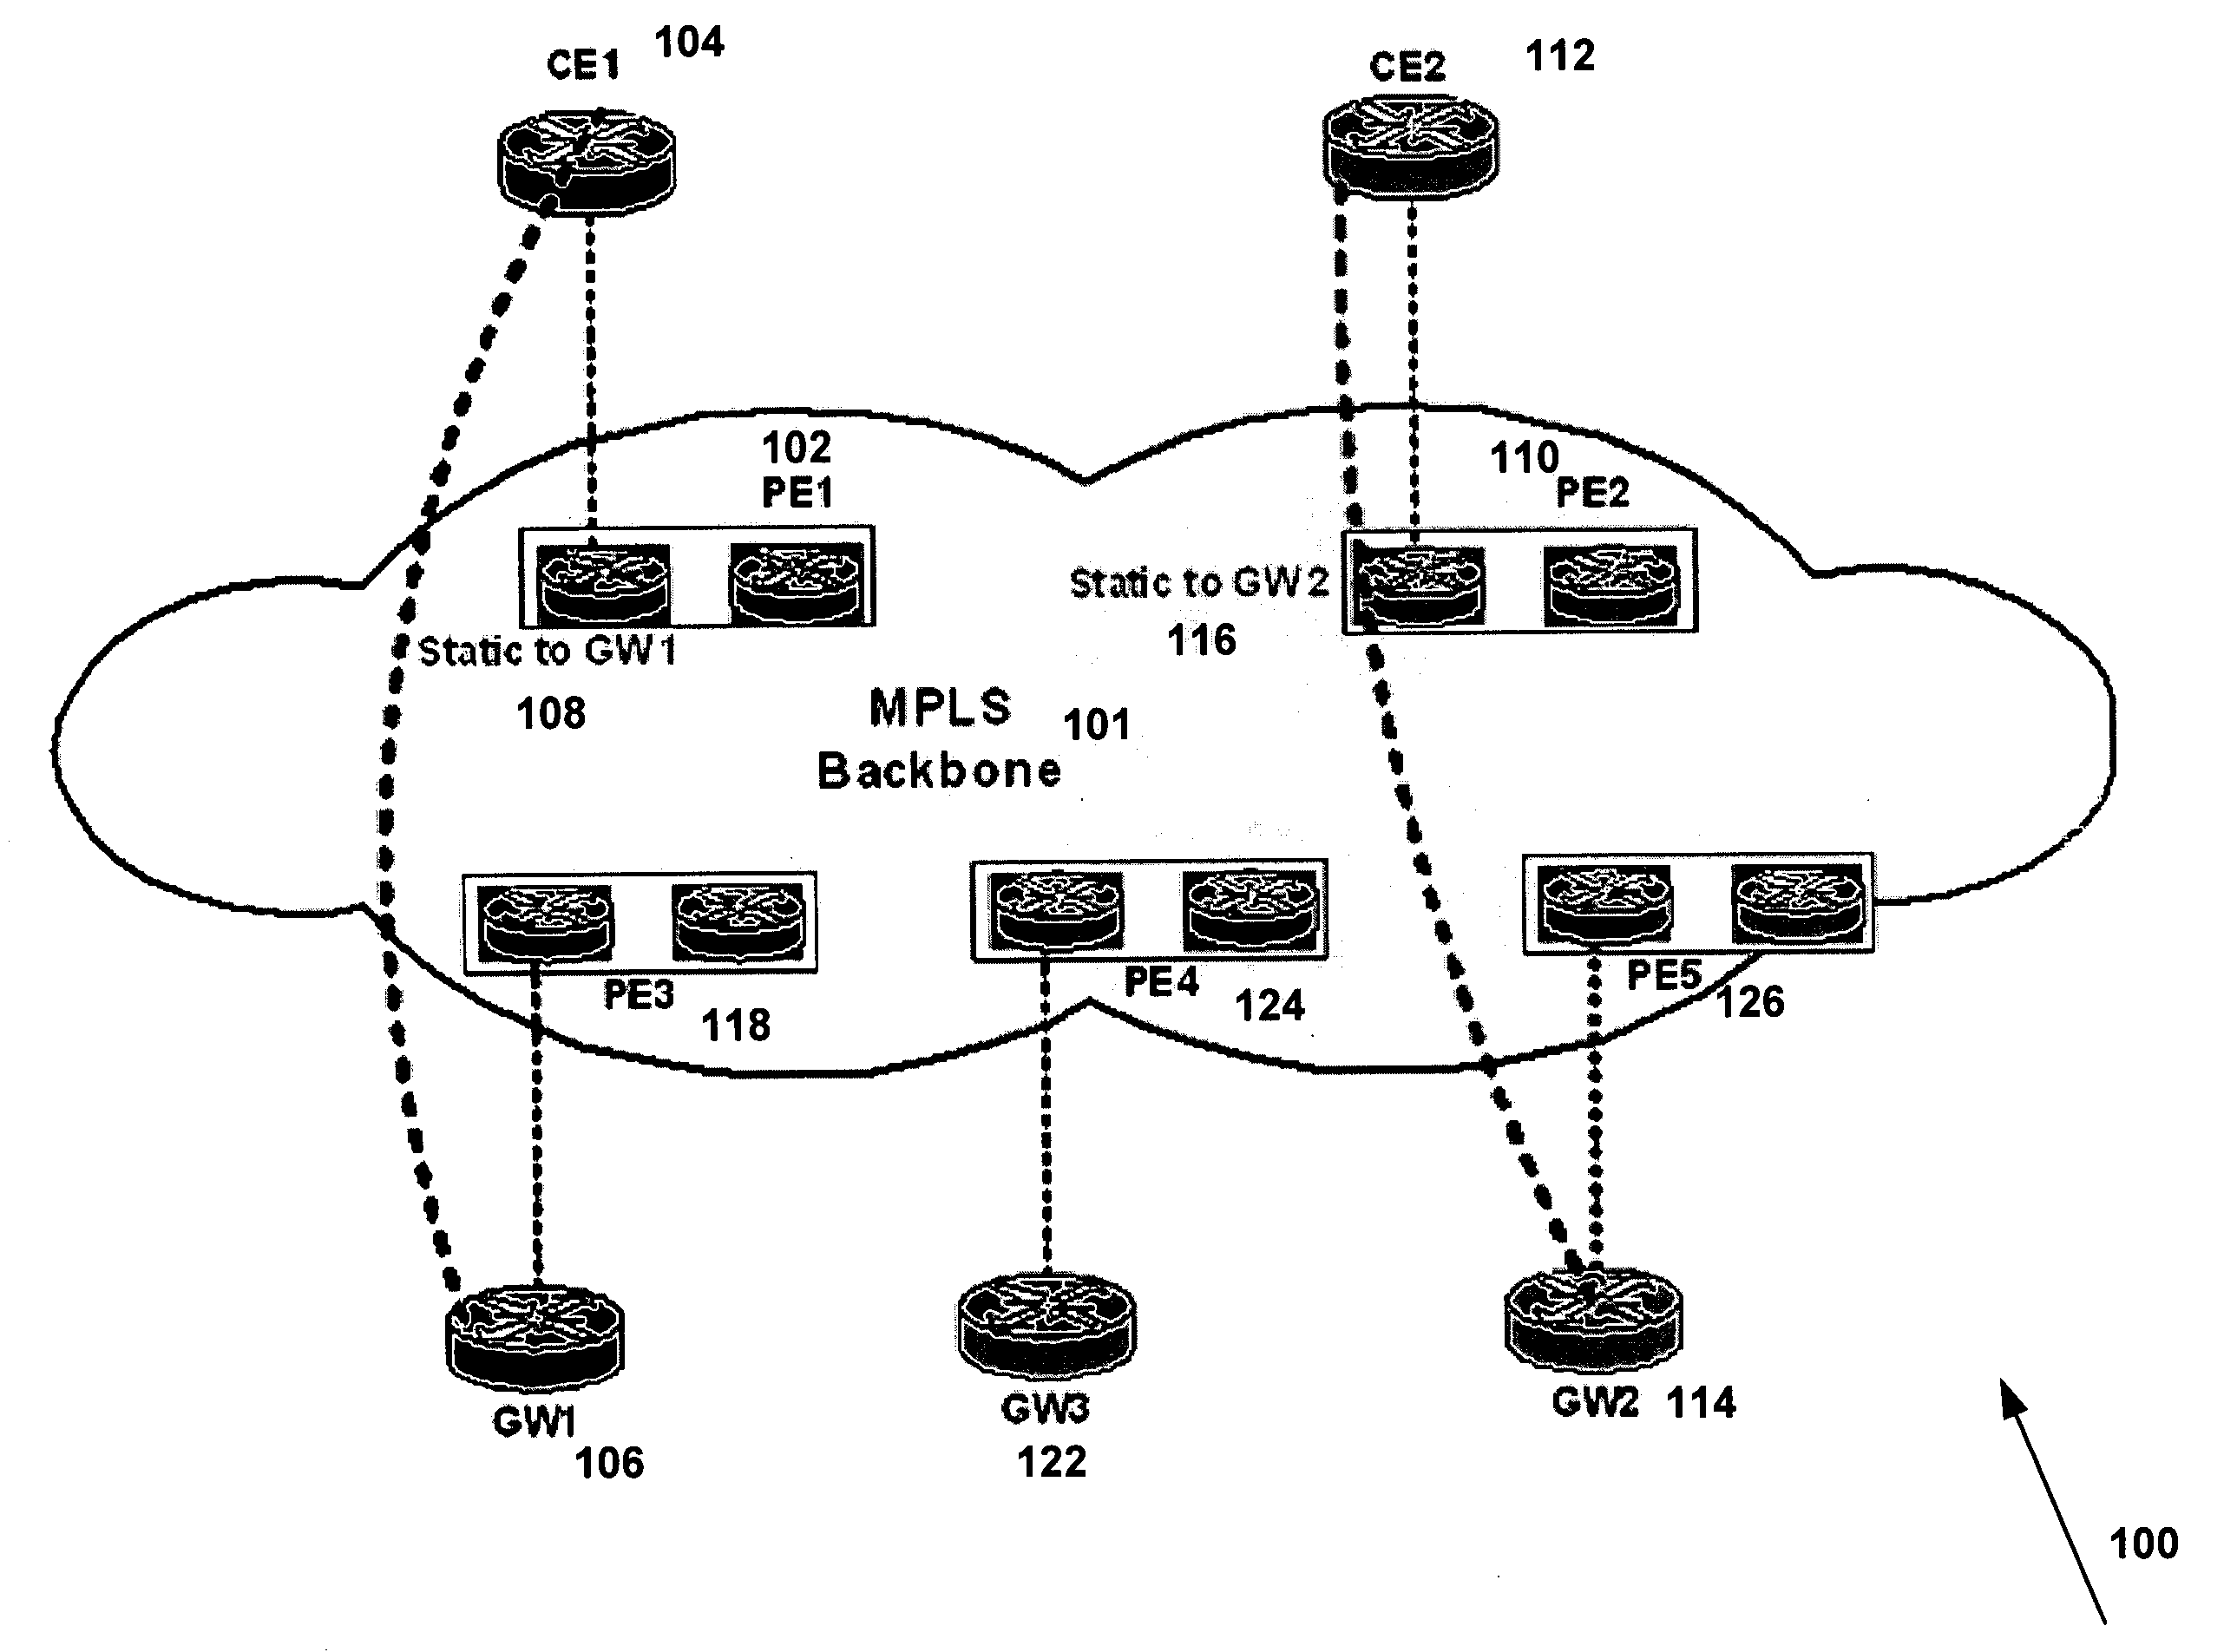 System and method for forwarding traffic data in an MPLS VPN